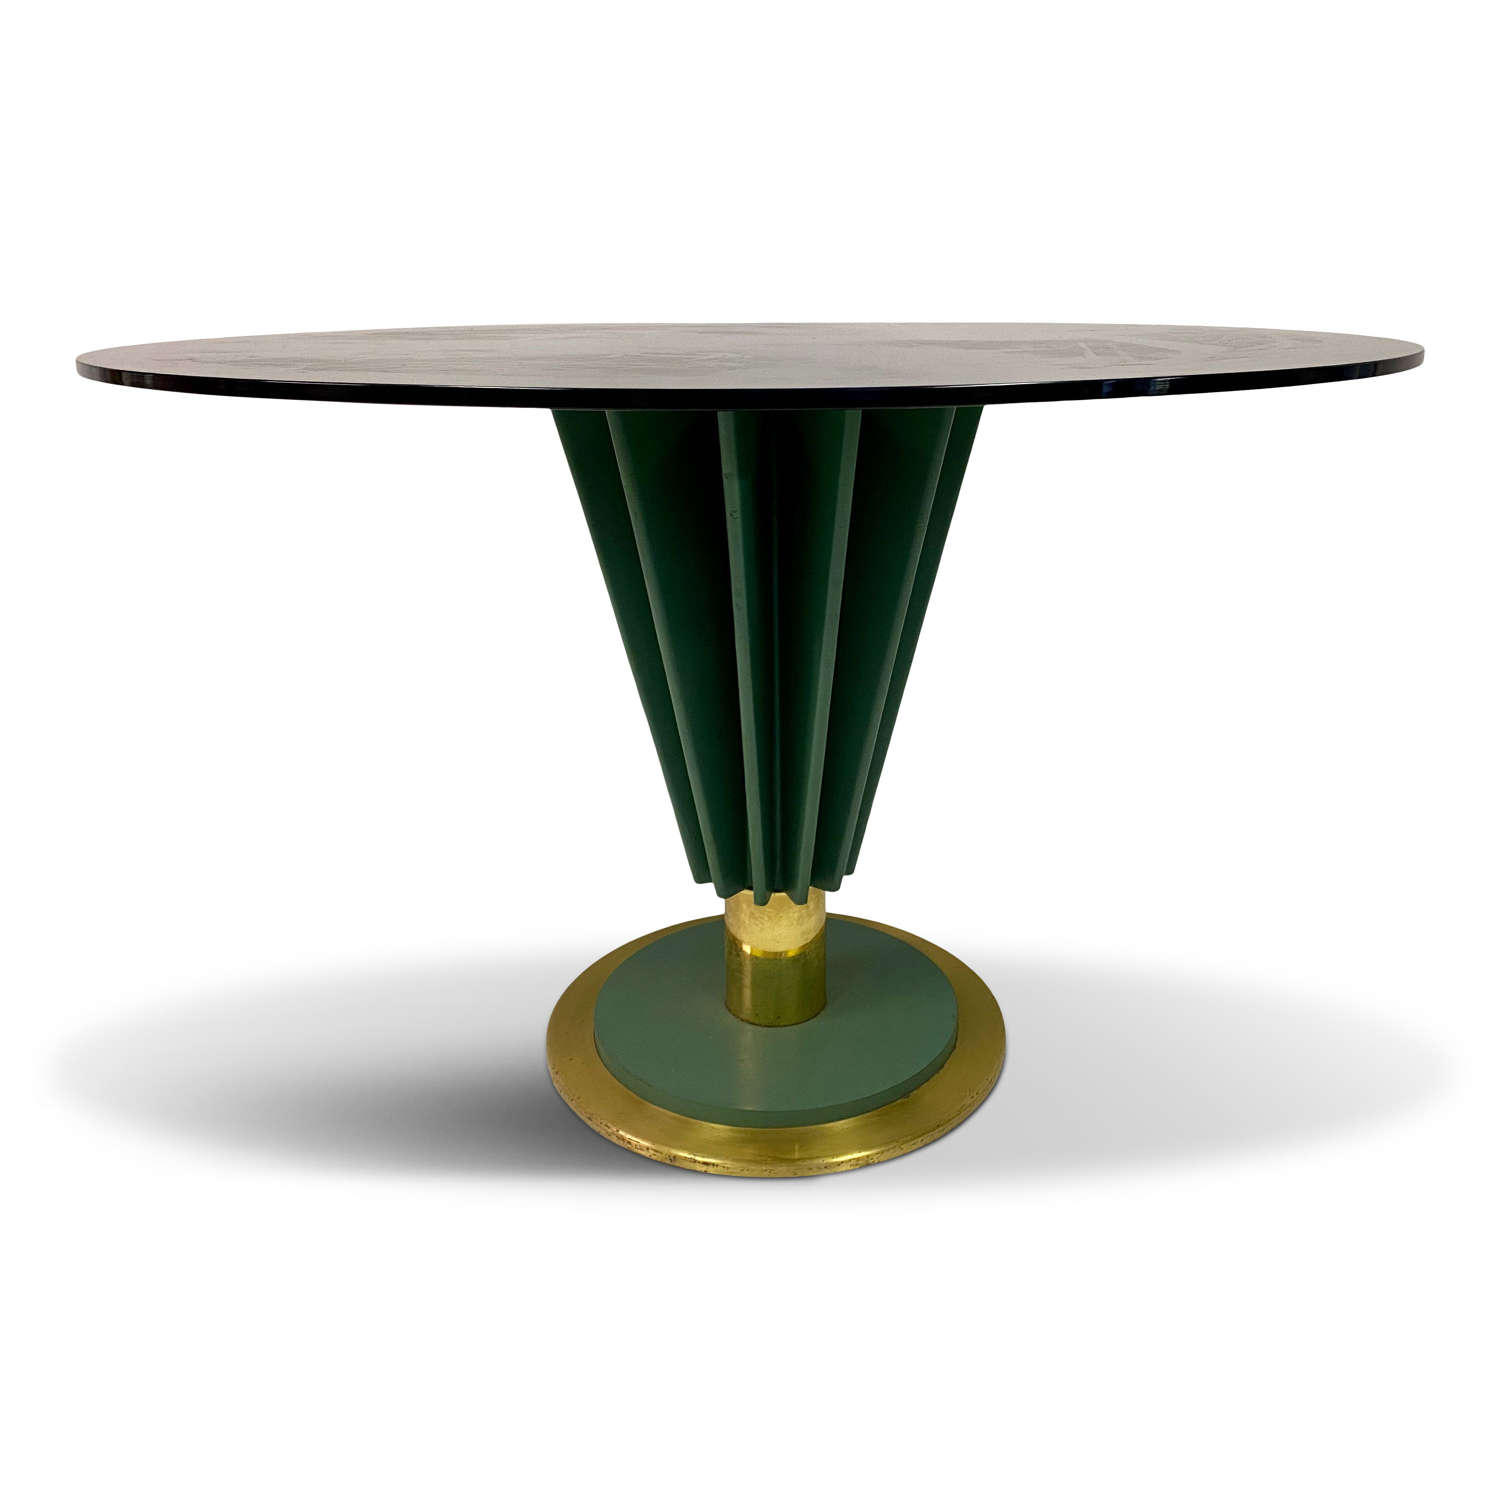 1970s Brass and Green Painted Iron Dining Table by Pierre Cardin